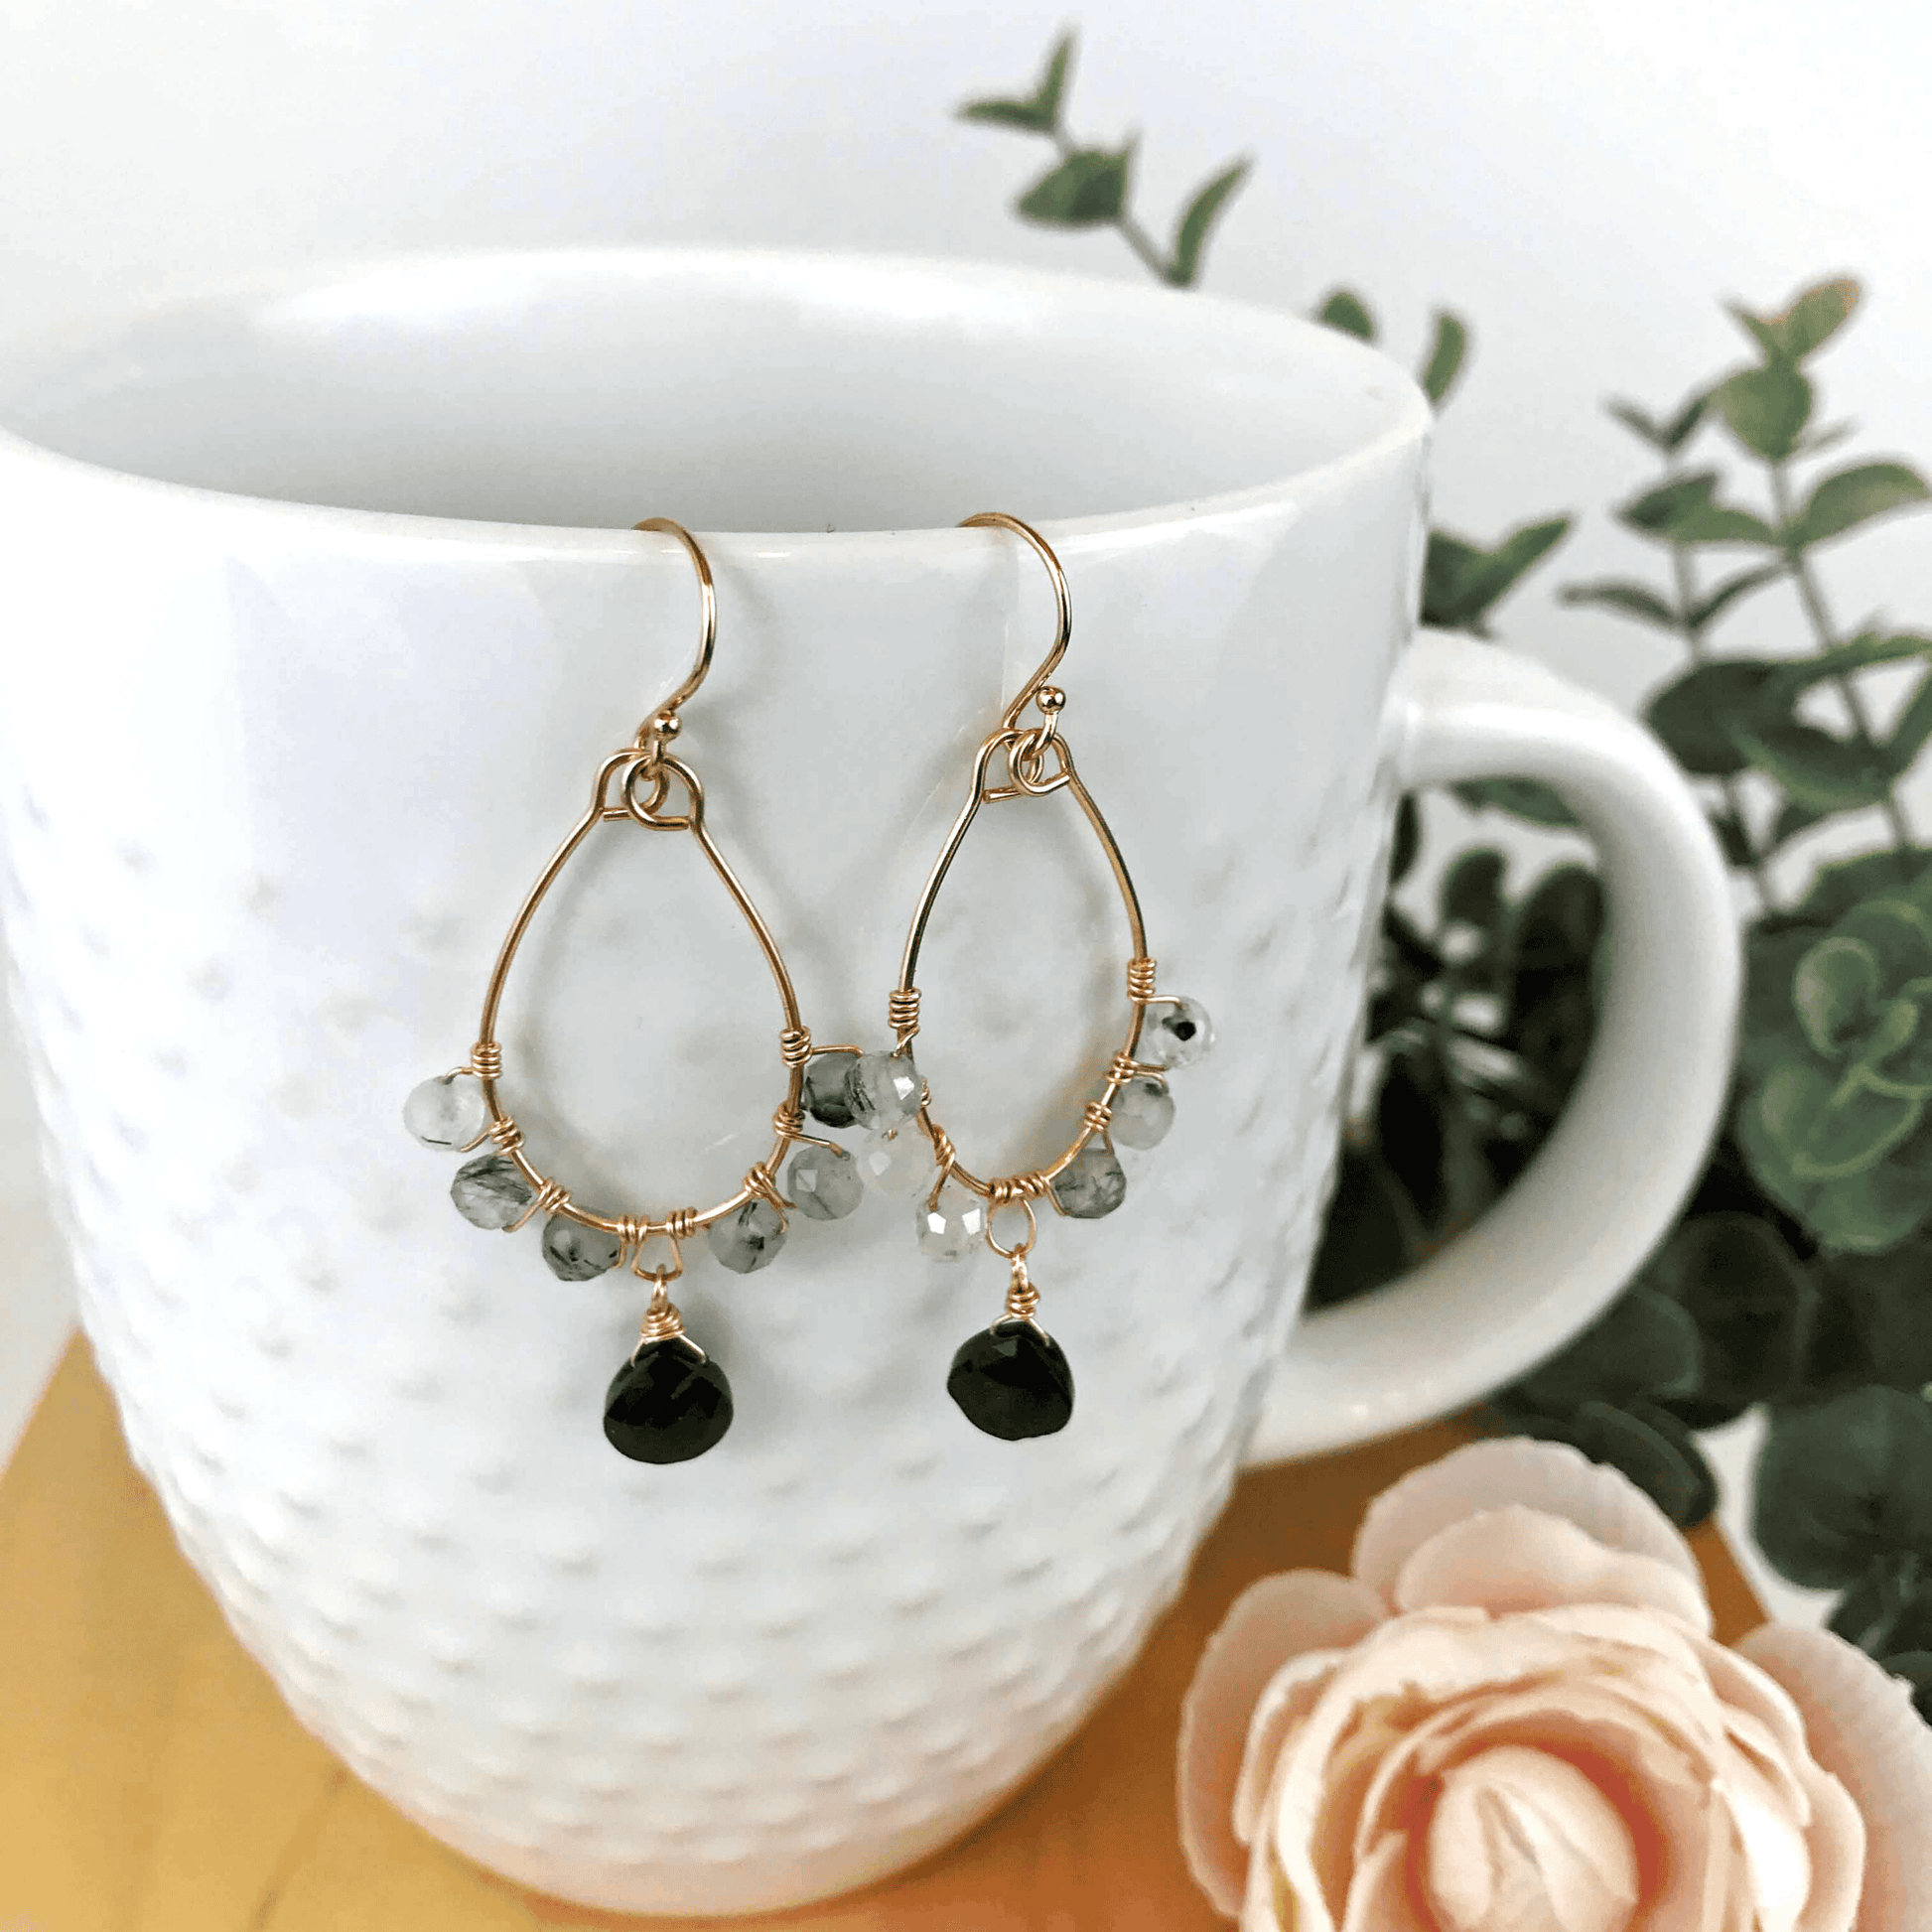 Black and Gold statement earrings